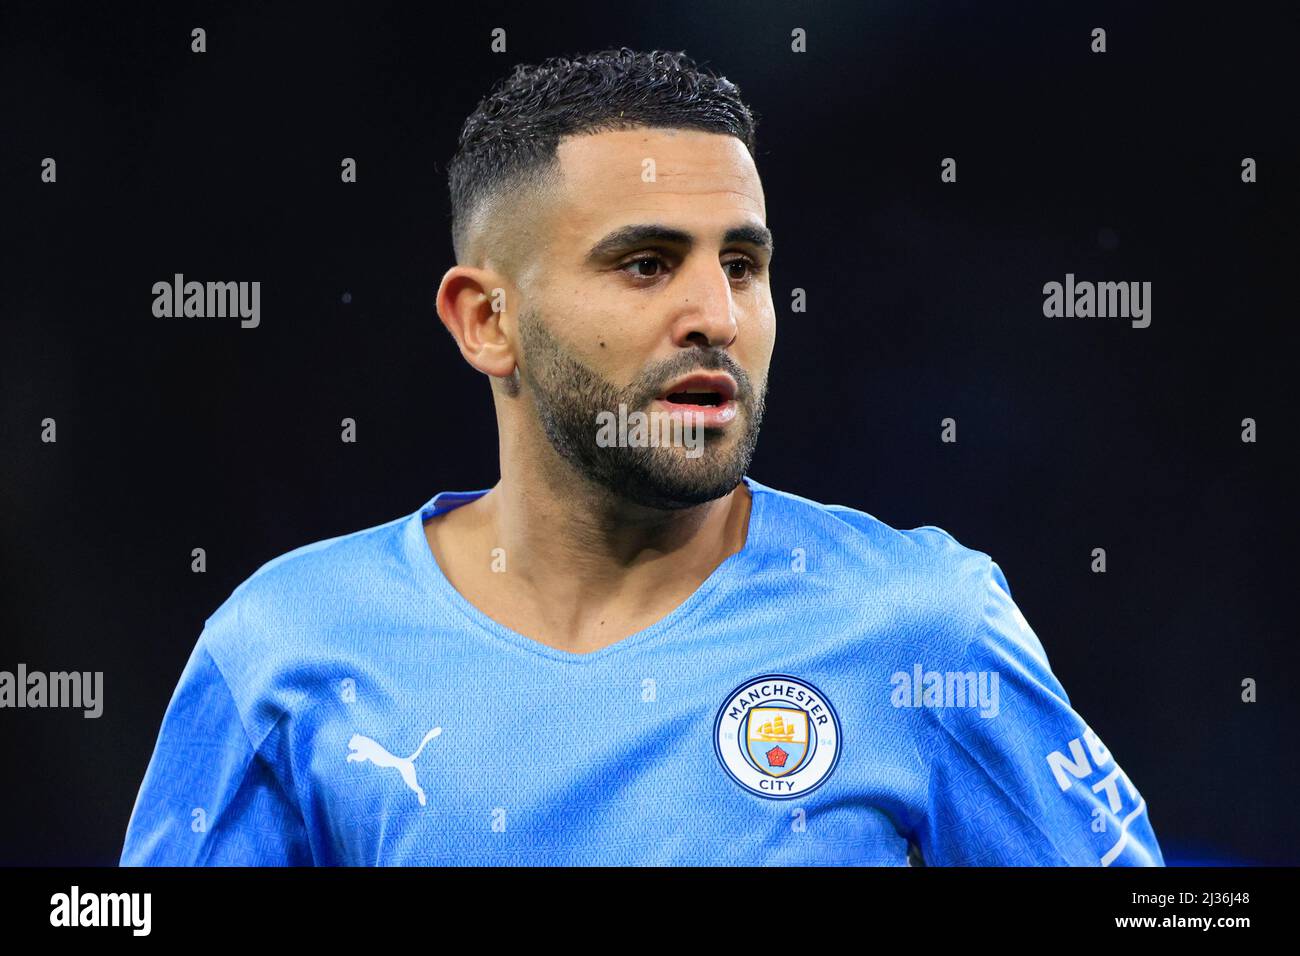 Manchester, UK. 05th Apr, 2022. Riyad Mahrez #26 of Manchester City in Manchester, United Kingdom on 4/5/2022. (Photo by Conor Molloy/News Images/Sipa USA) Credit: Sipa USA/Alamy Live News Stock Photo